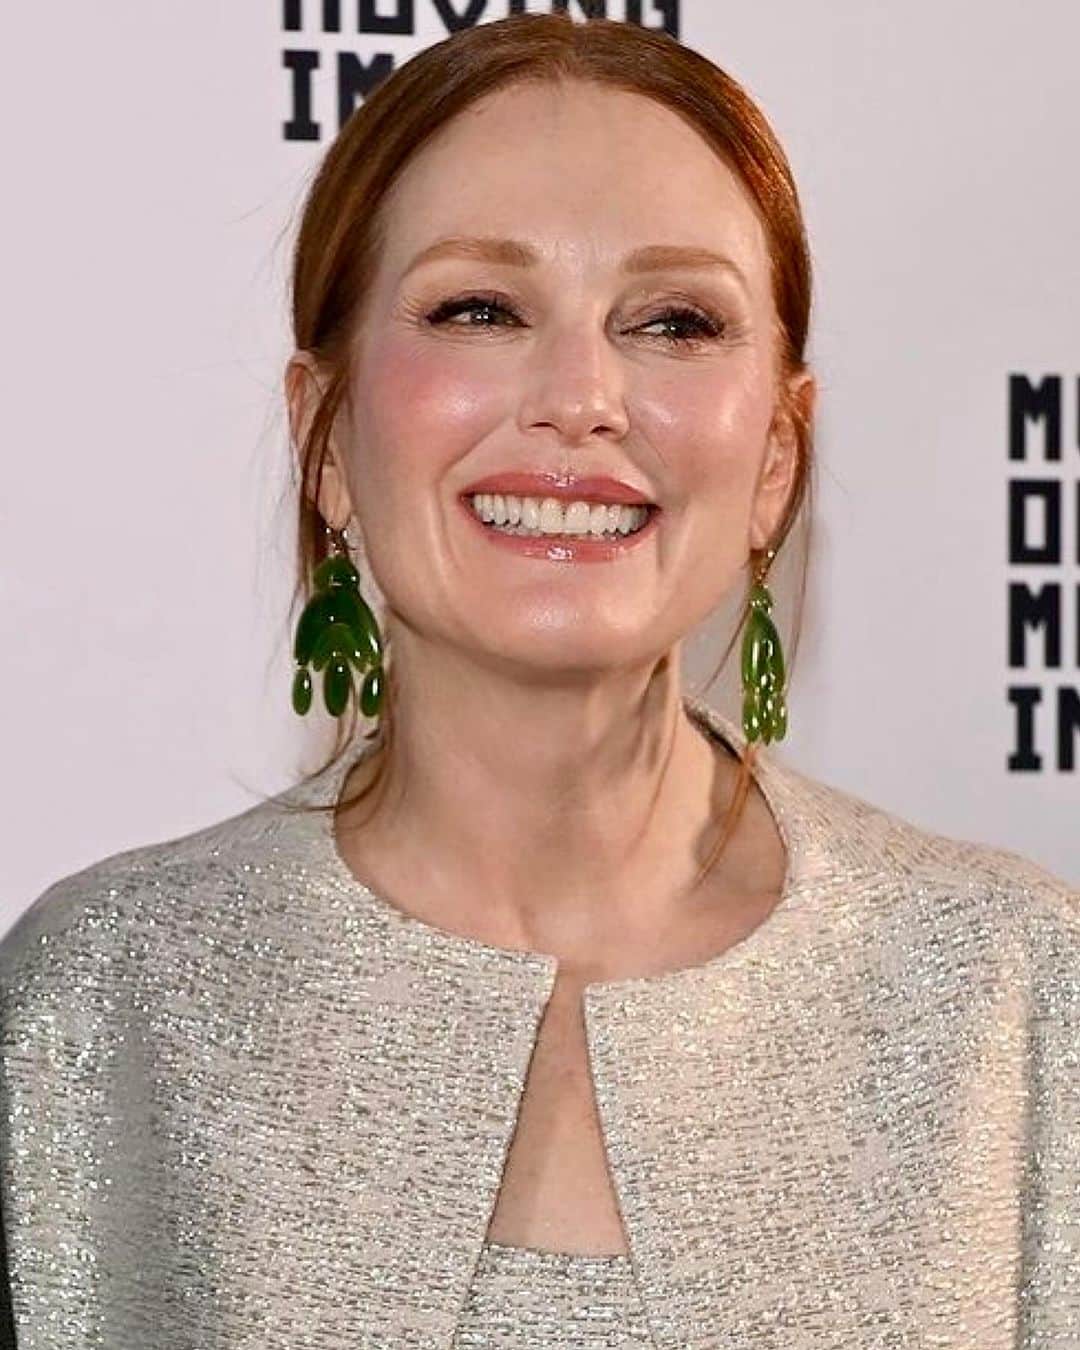 Hung Vanngoのインスタグラム：「#JulianneMoore (@juliannemoore) in @dior at MoMi ❤️⭐️✨💫🌟@maydecemberfilm is now on @netflixfilm ❤️. Styled by @kateyoung assisted by @nataliegilhool  💇🏻‍♀️ @hairbyorlandopita  💄 @hungvanngo assisted by @jaydenhopham」